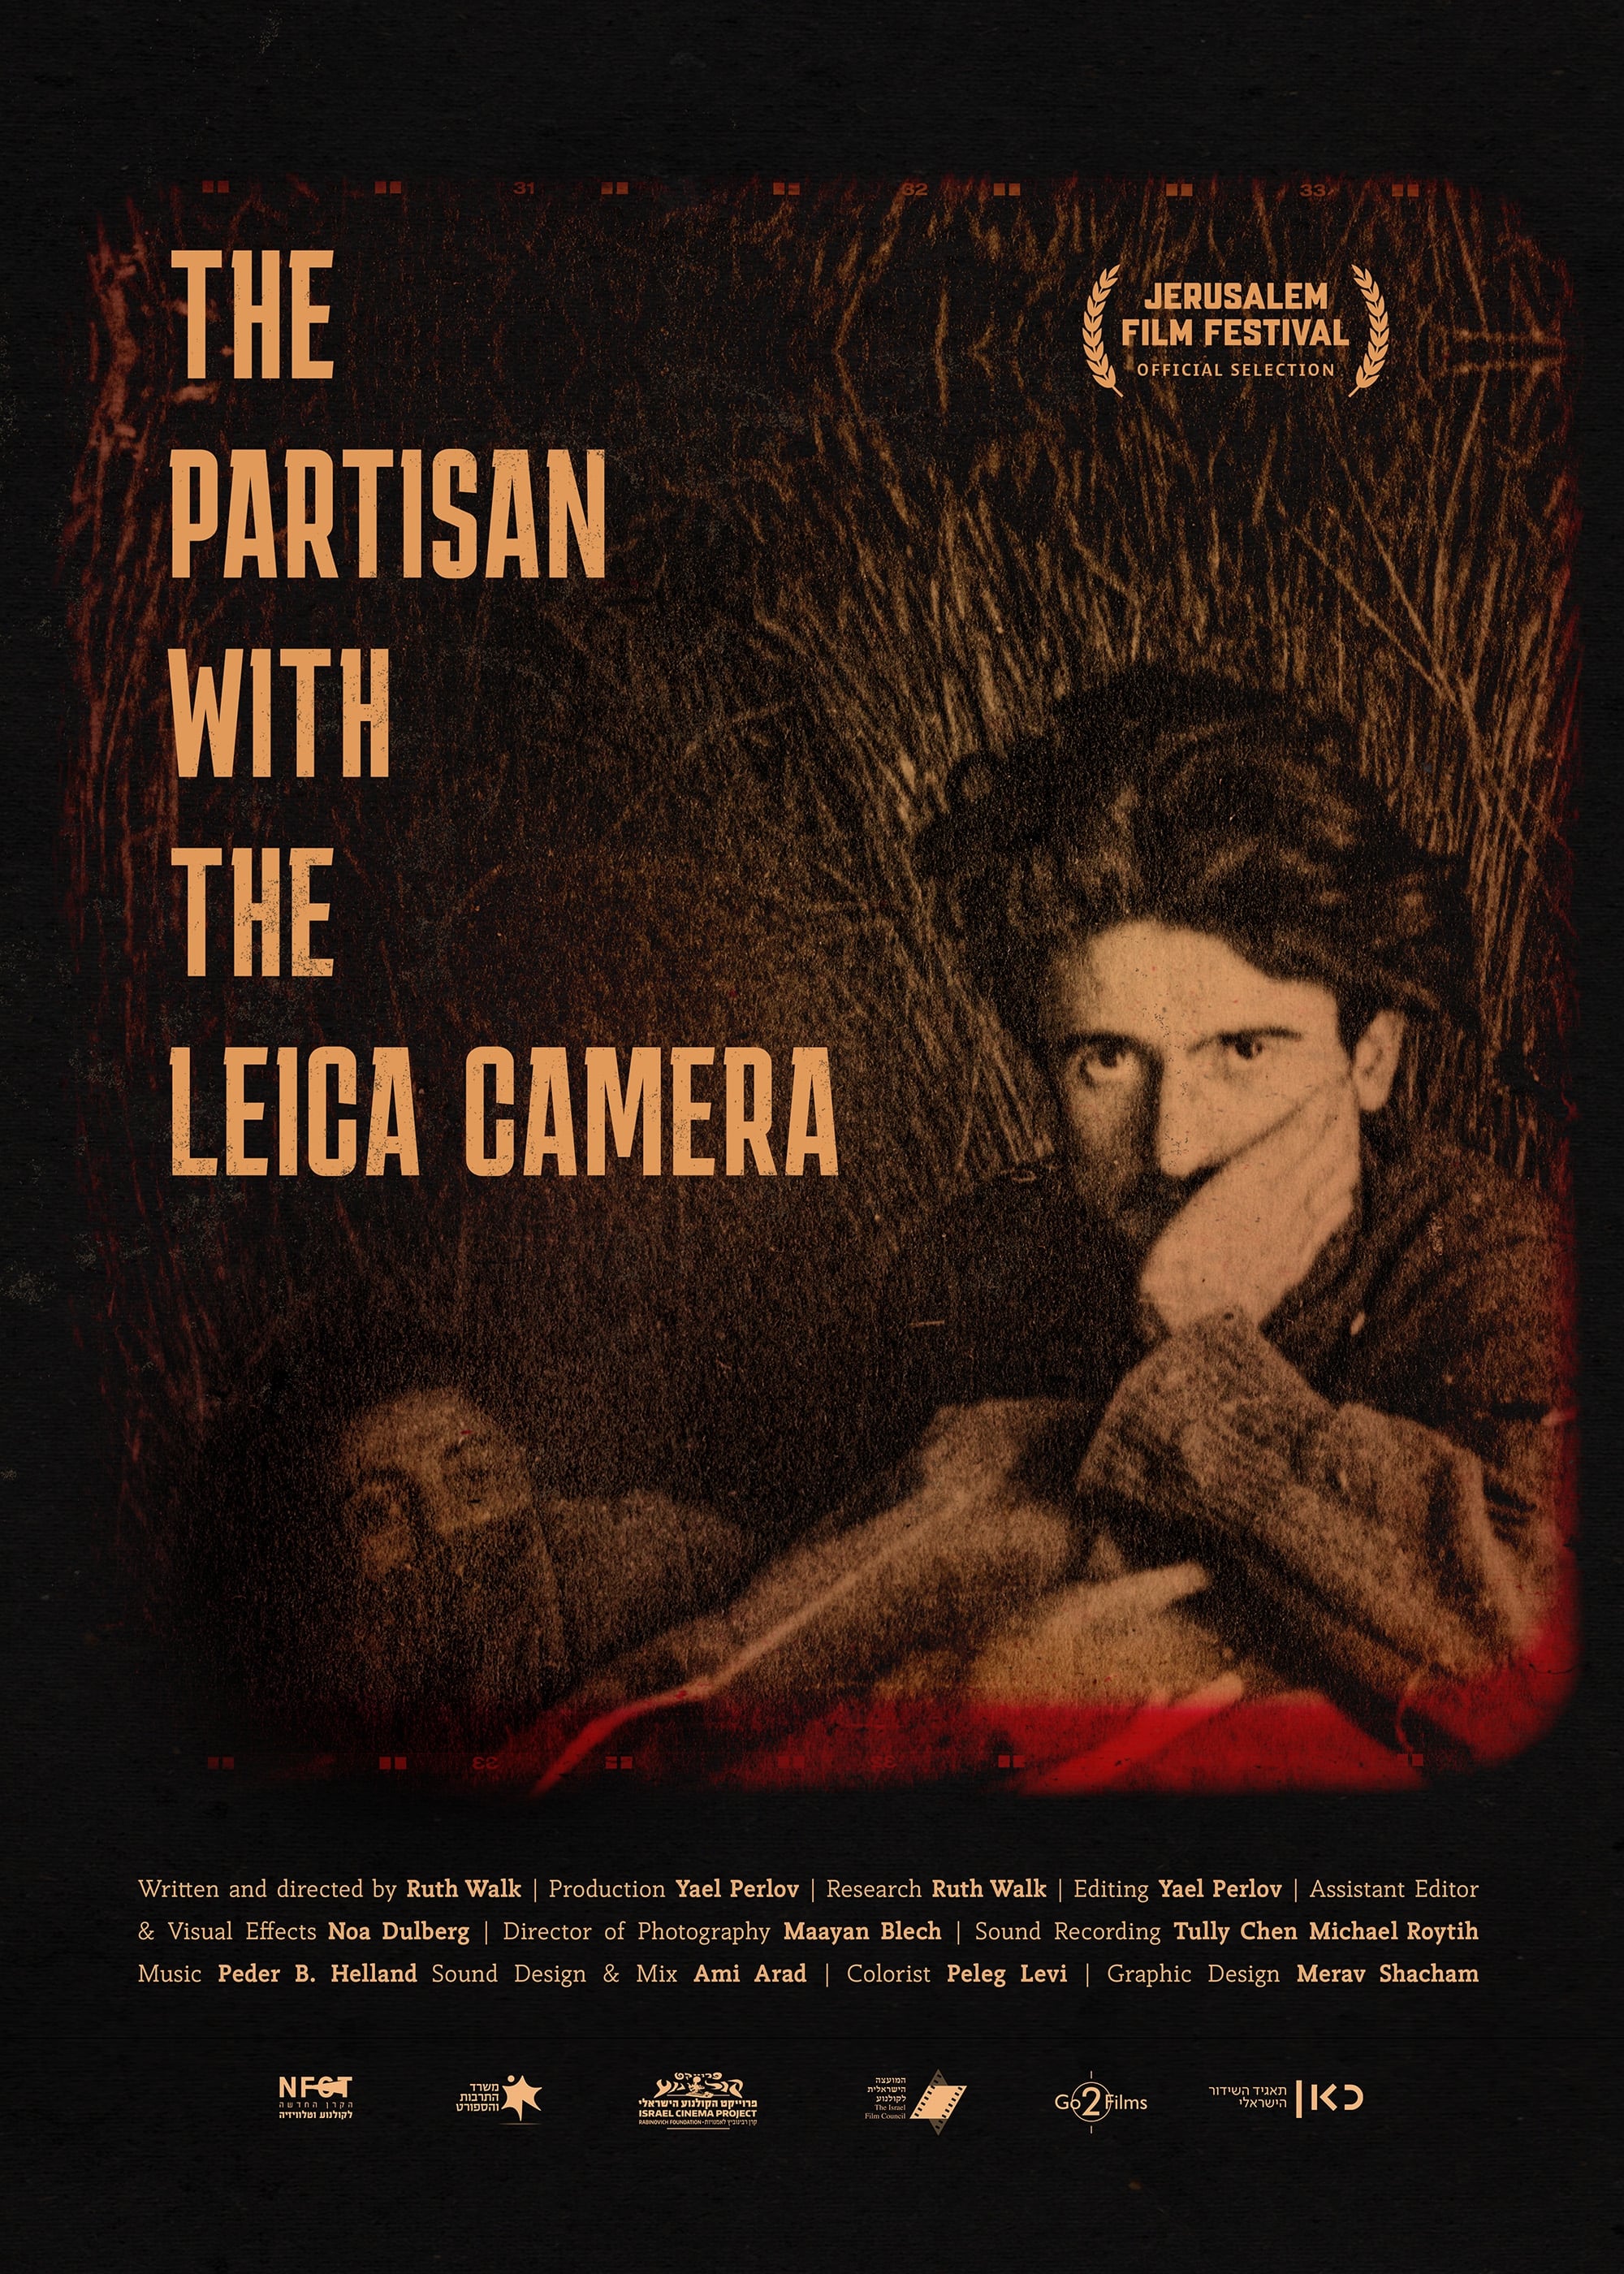 The Partisan With The Leica Camera